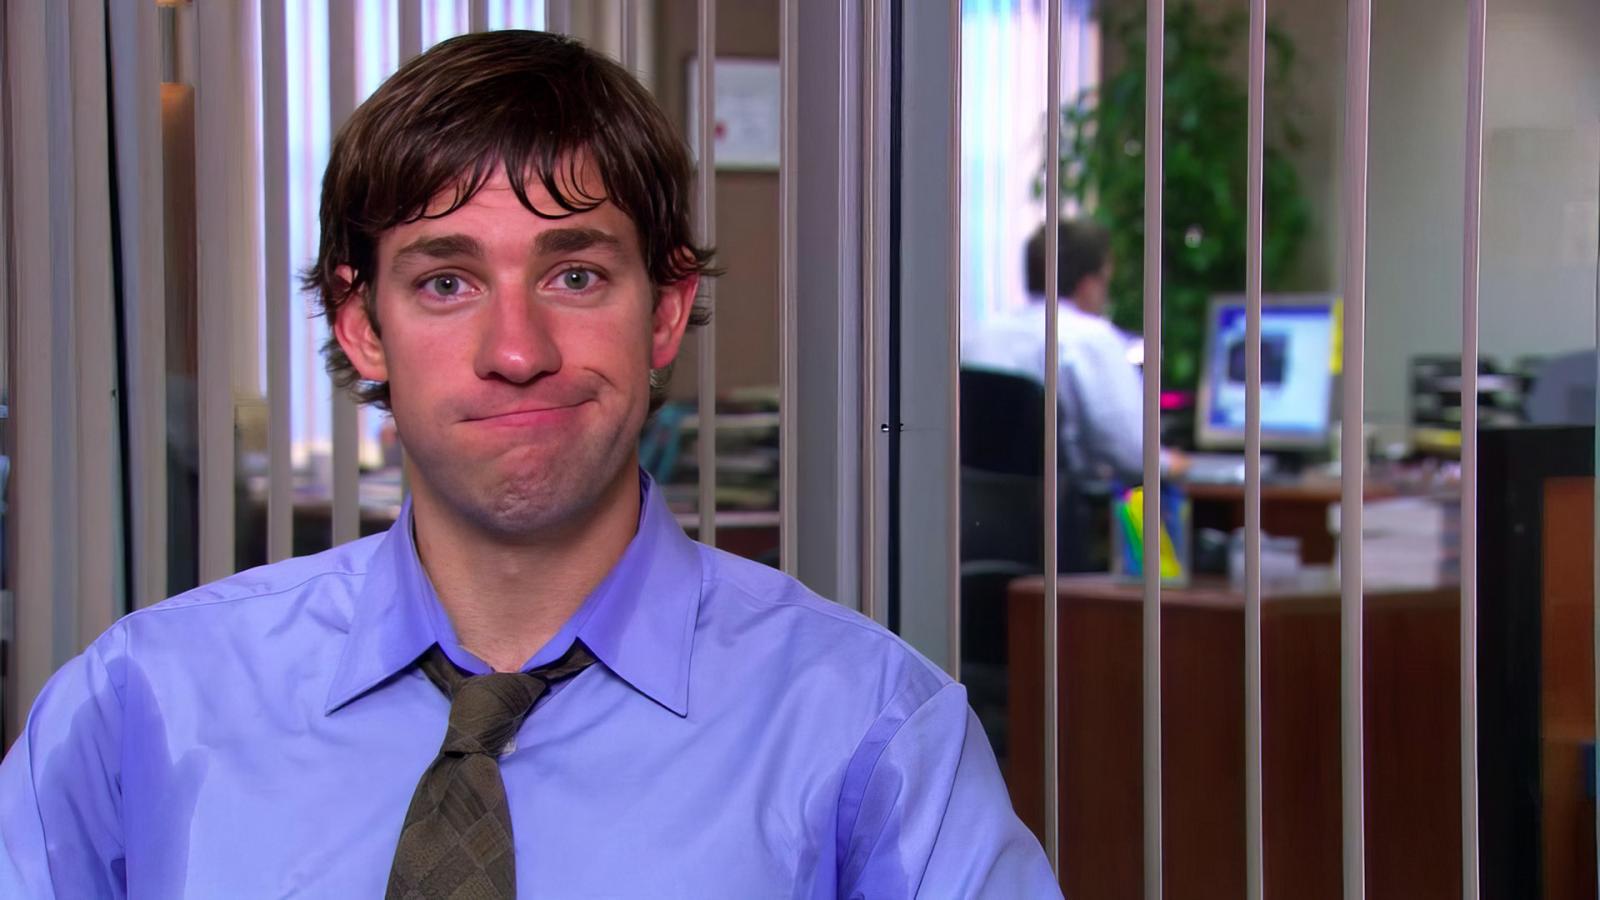 Find Out Which 'The Office' Employee You Are Based on Your Zodiac Sign - image 3